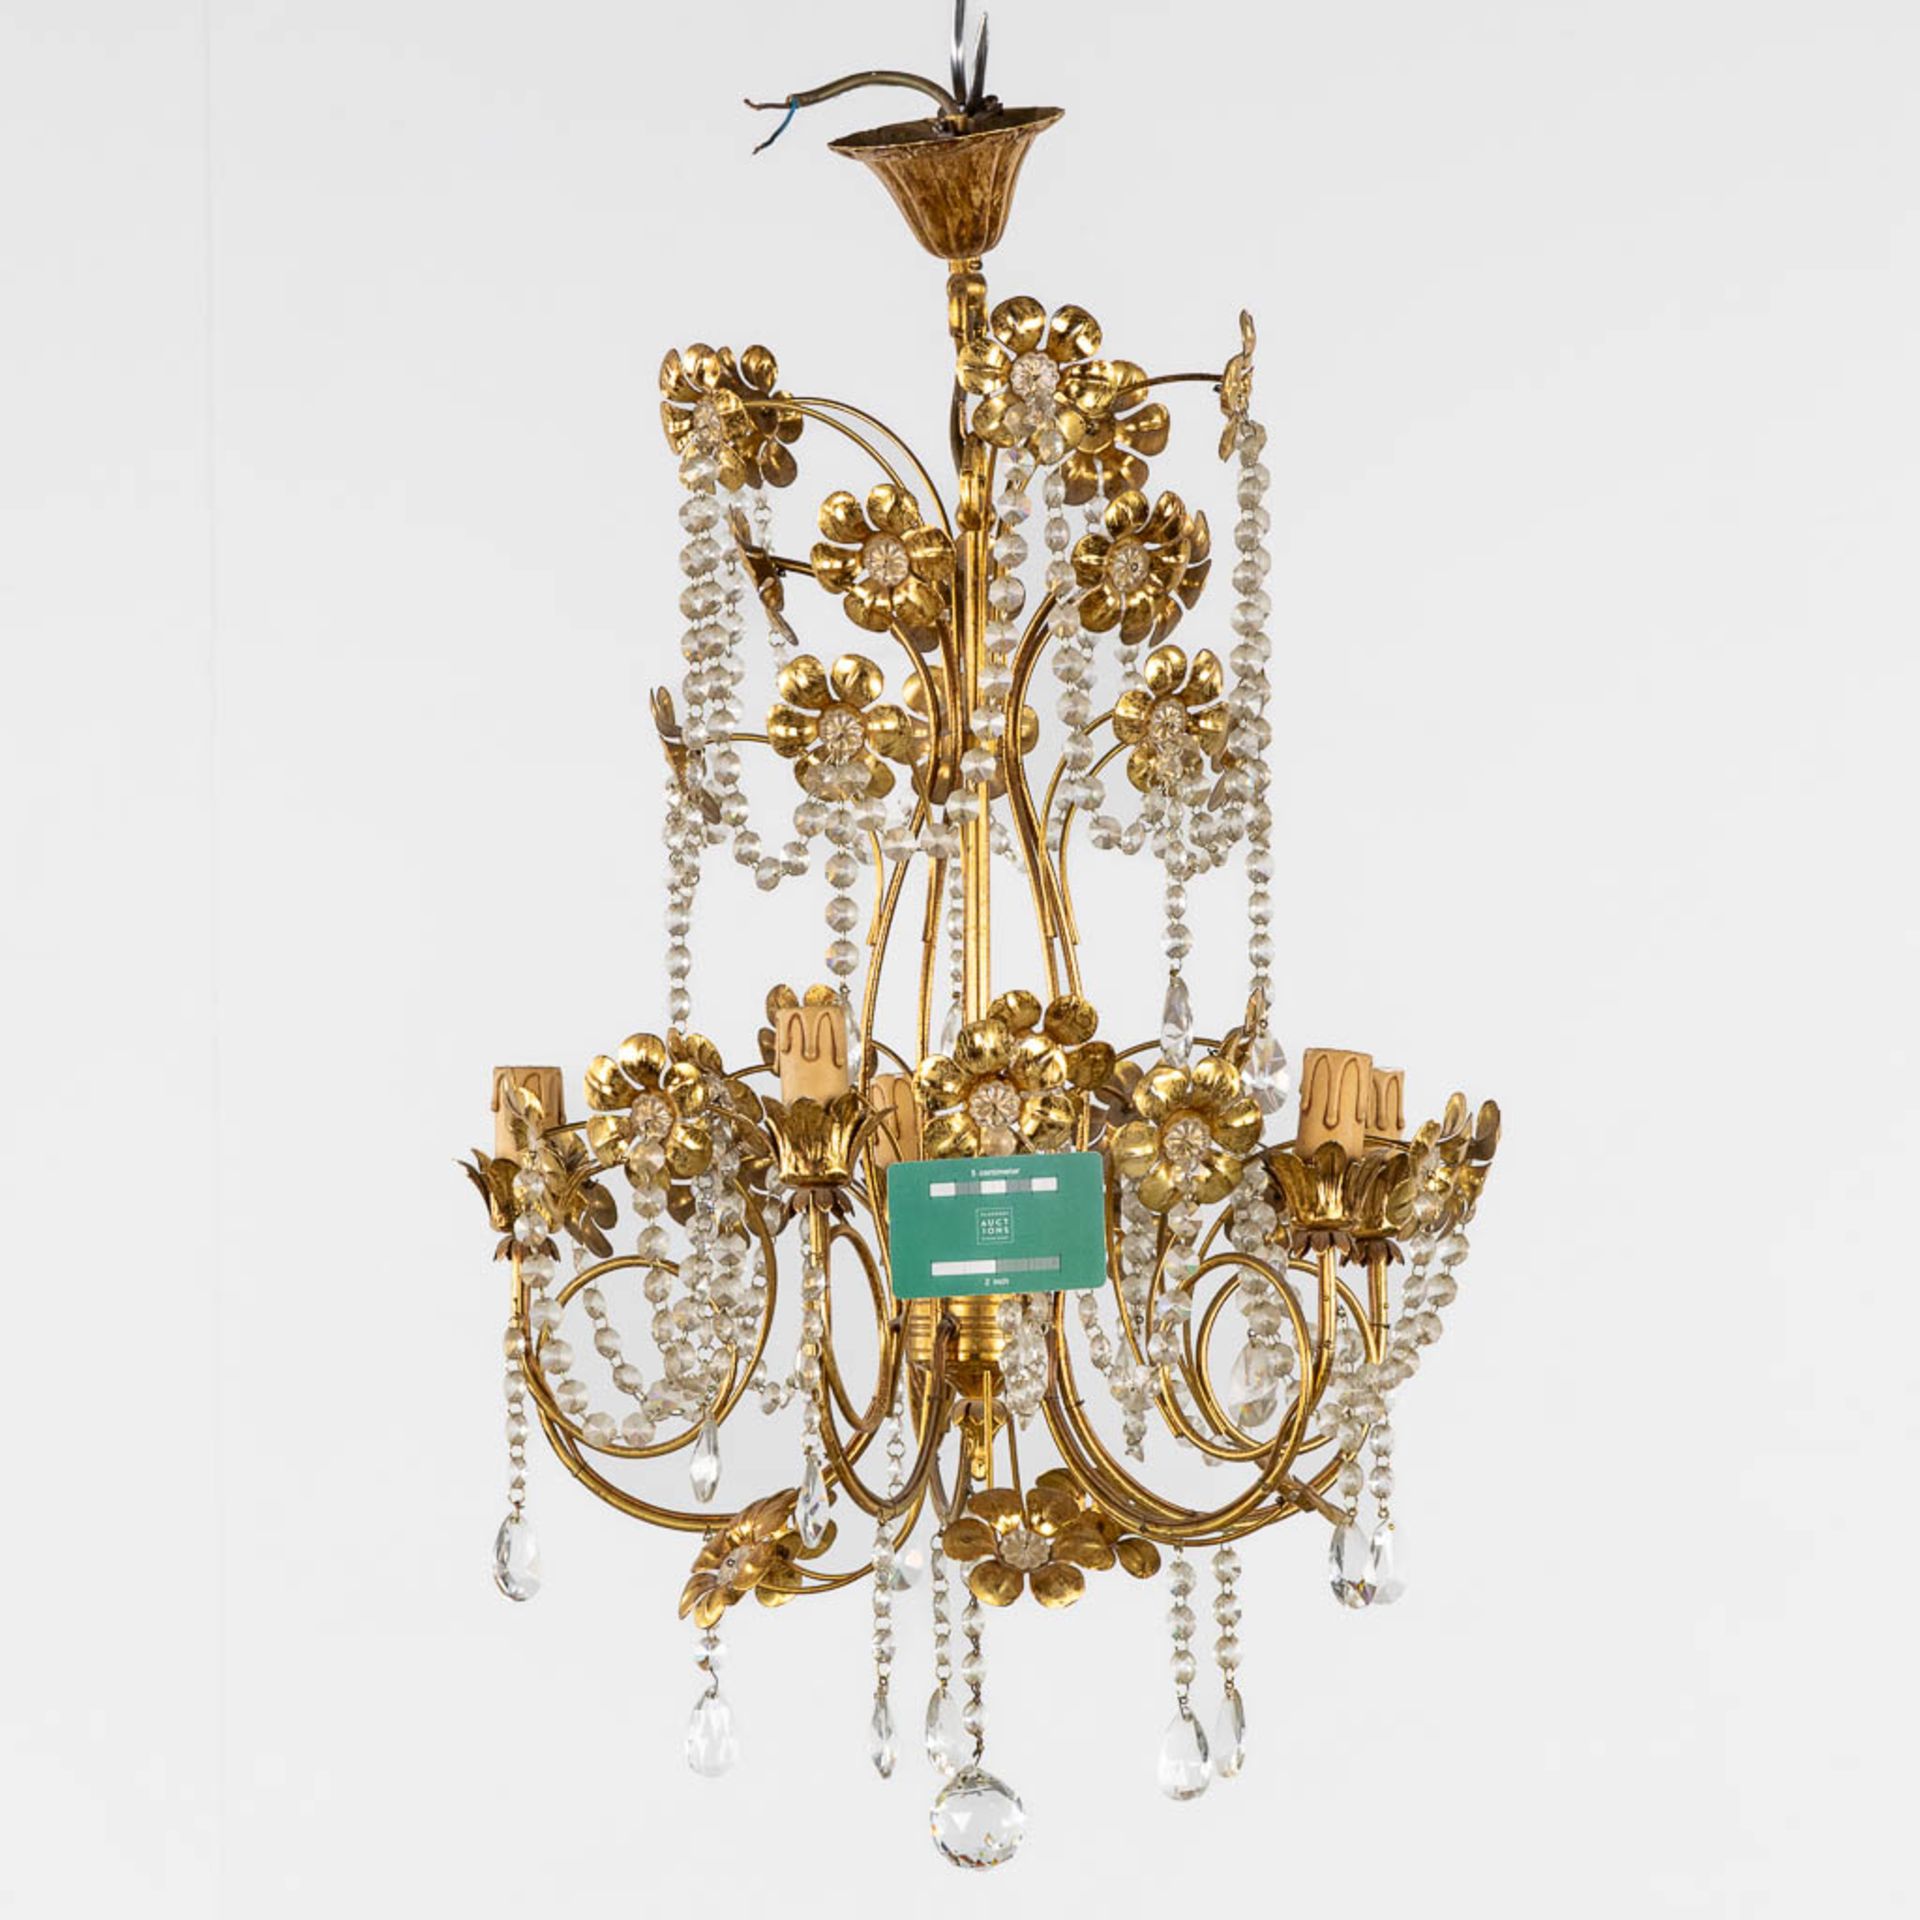 A decorative, floral hall lamp. Brass mounted with glass. 20th C. (H:74 x D:43 cm) - Image 2 of 11